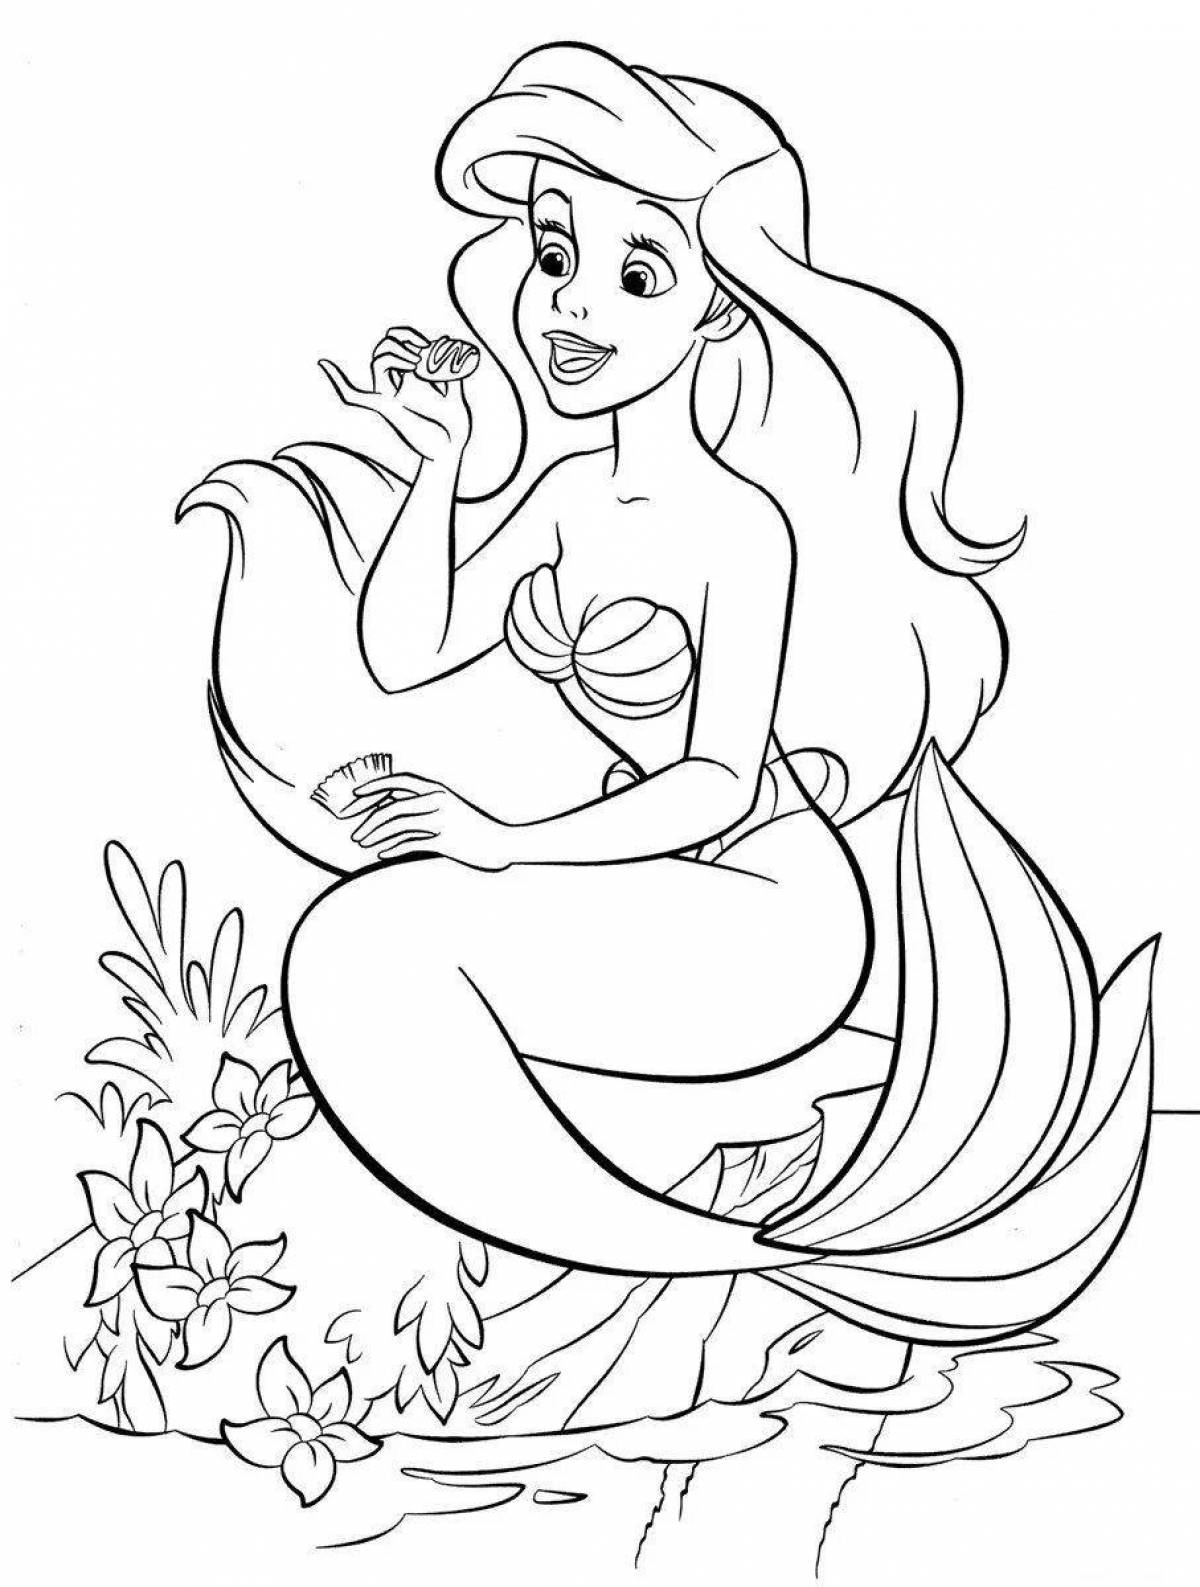 Glorious little mermaid coloring book for kids 4-5 years old